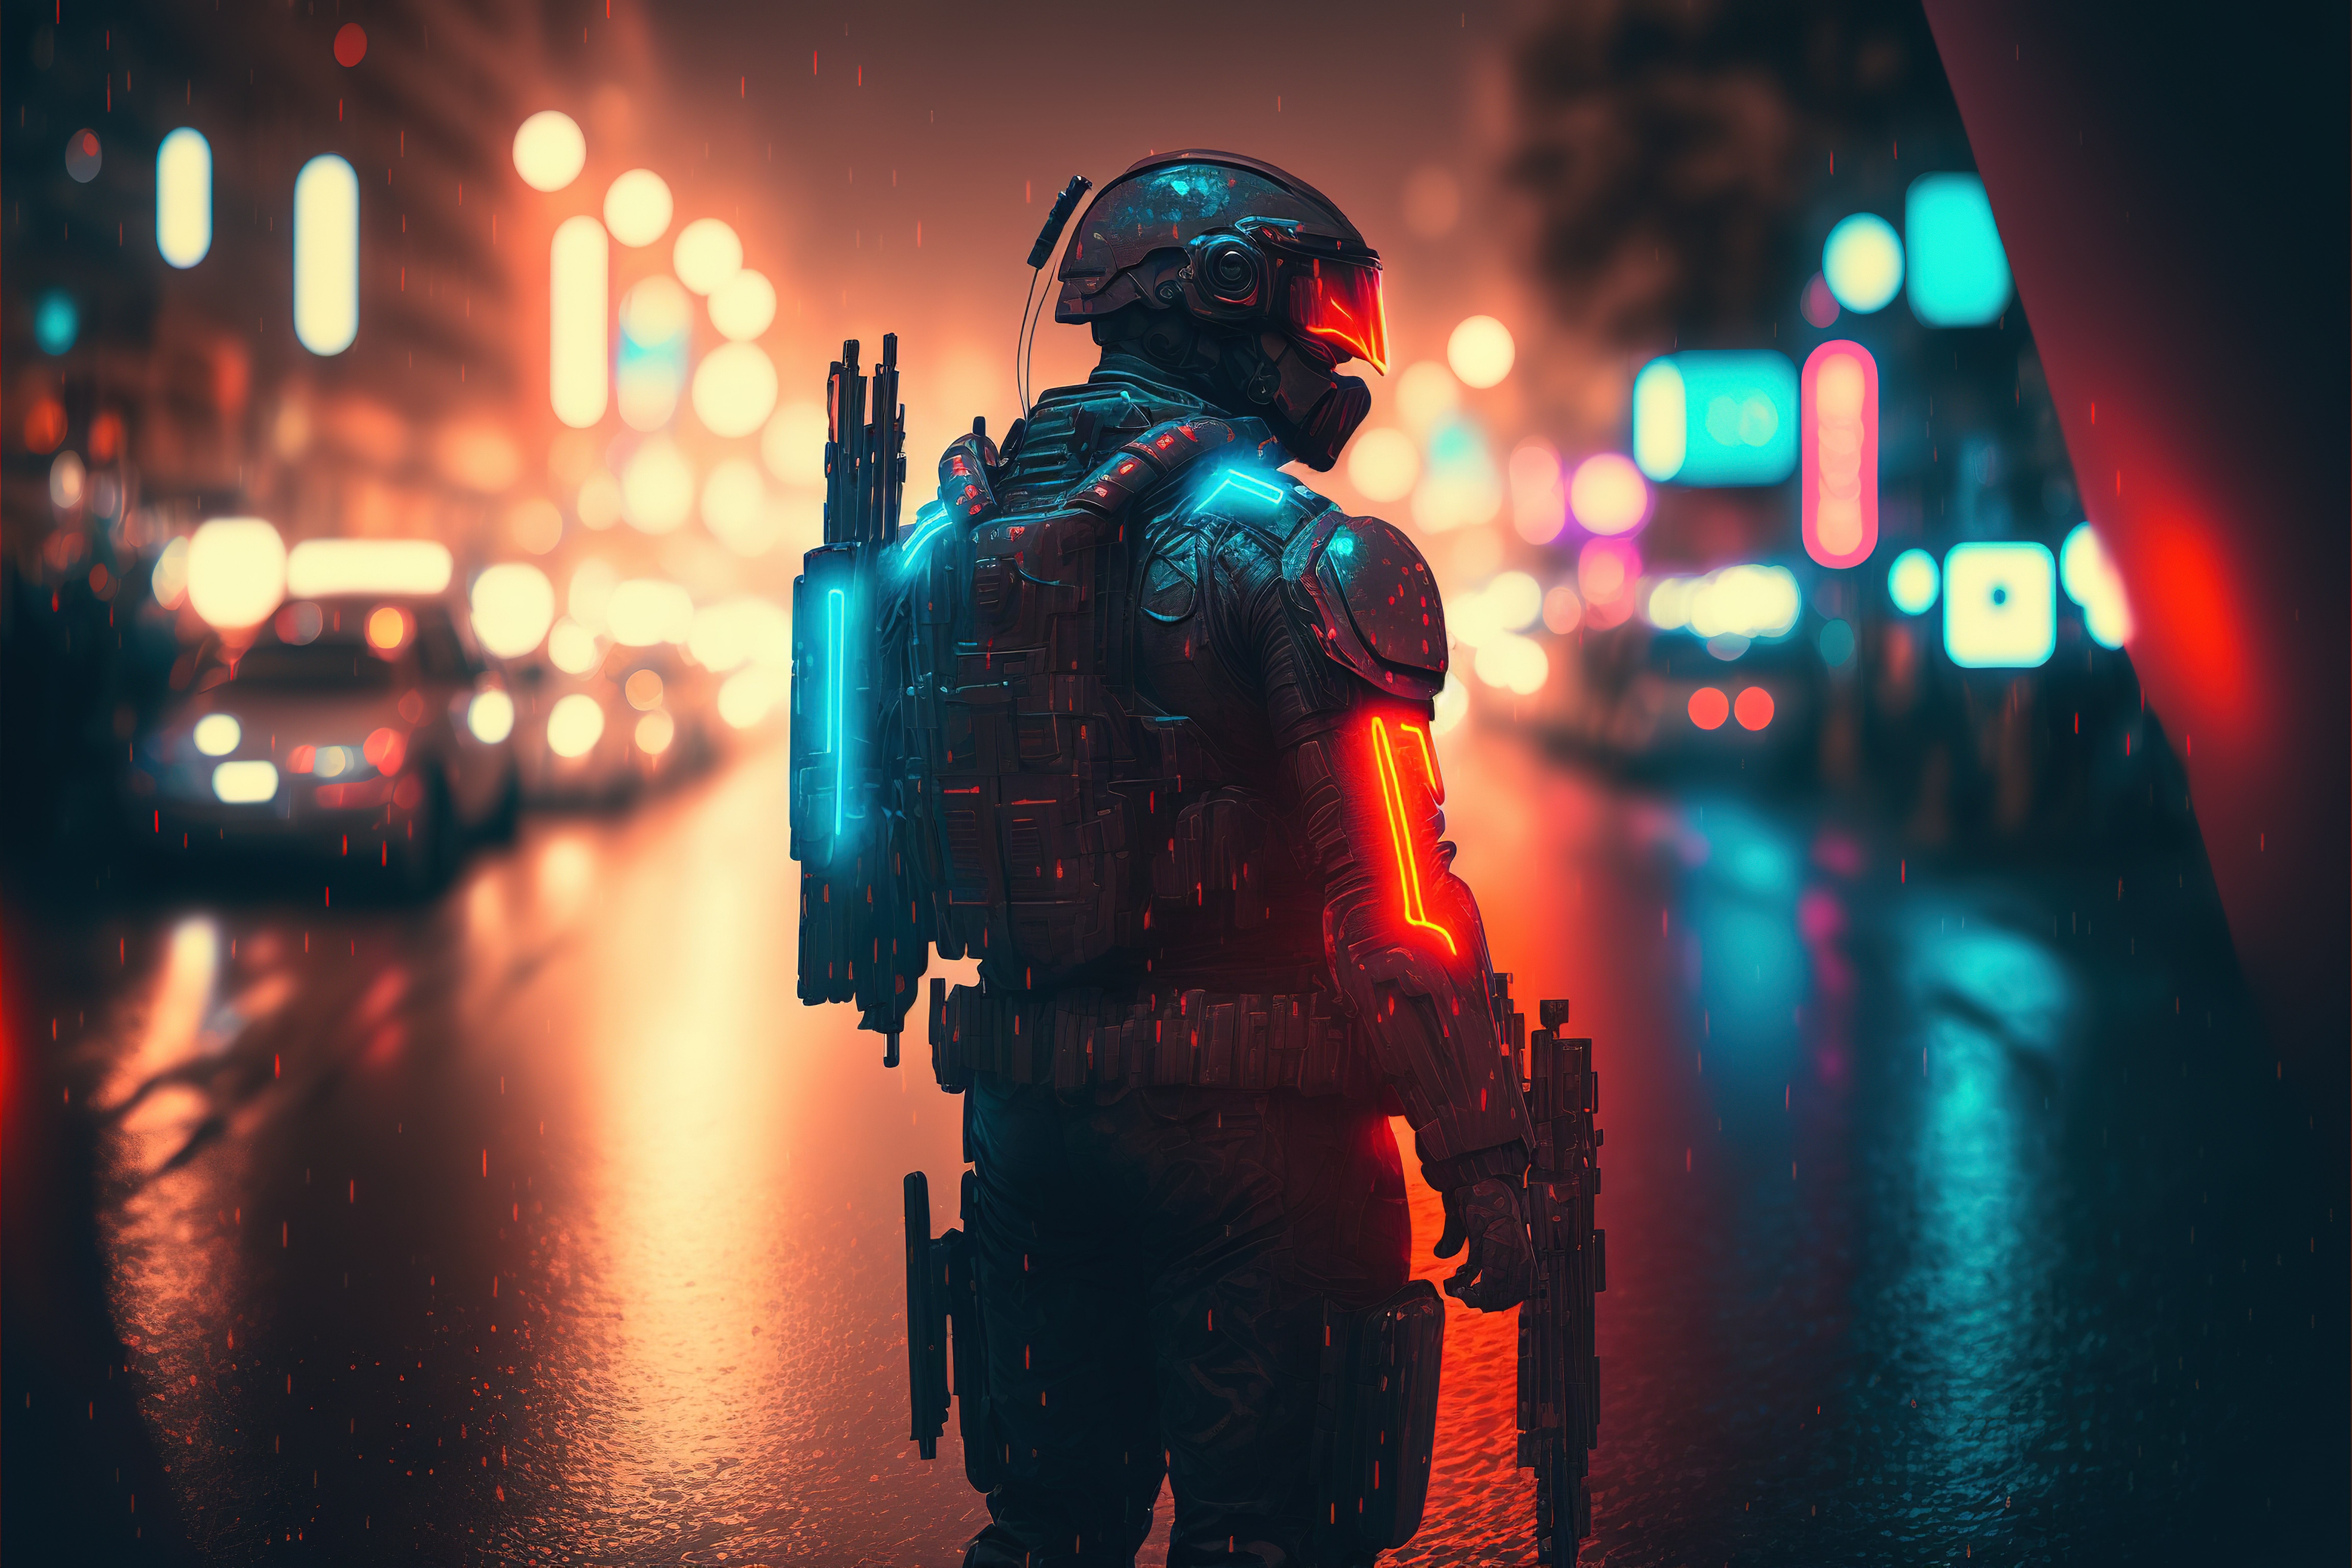 Armed super soldier with supersonic gun in the cyber city. cyberpunk city. cyborg. Robot. Generative AI